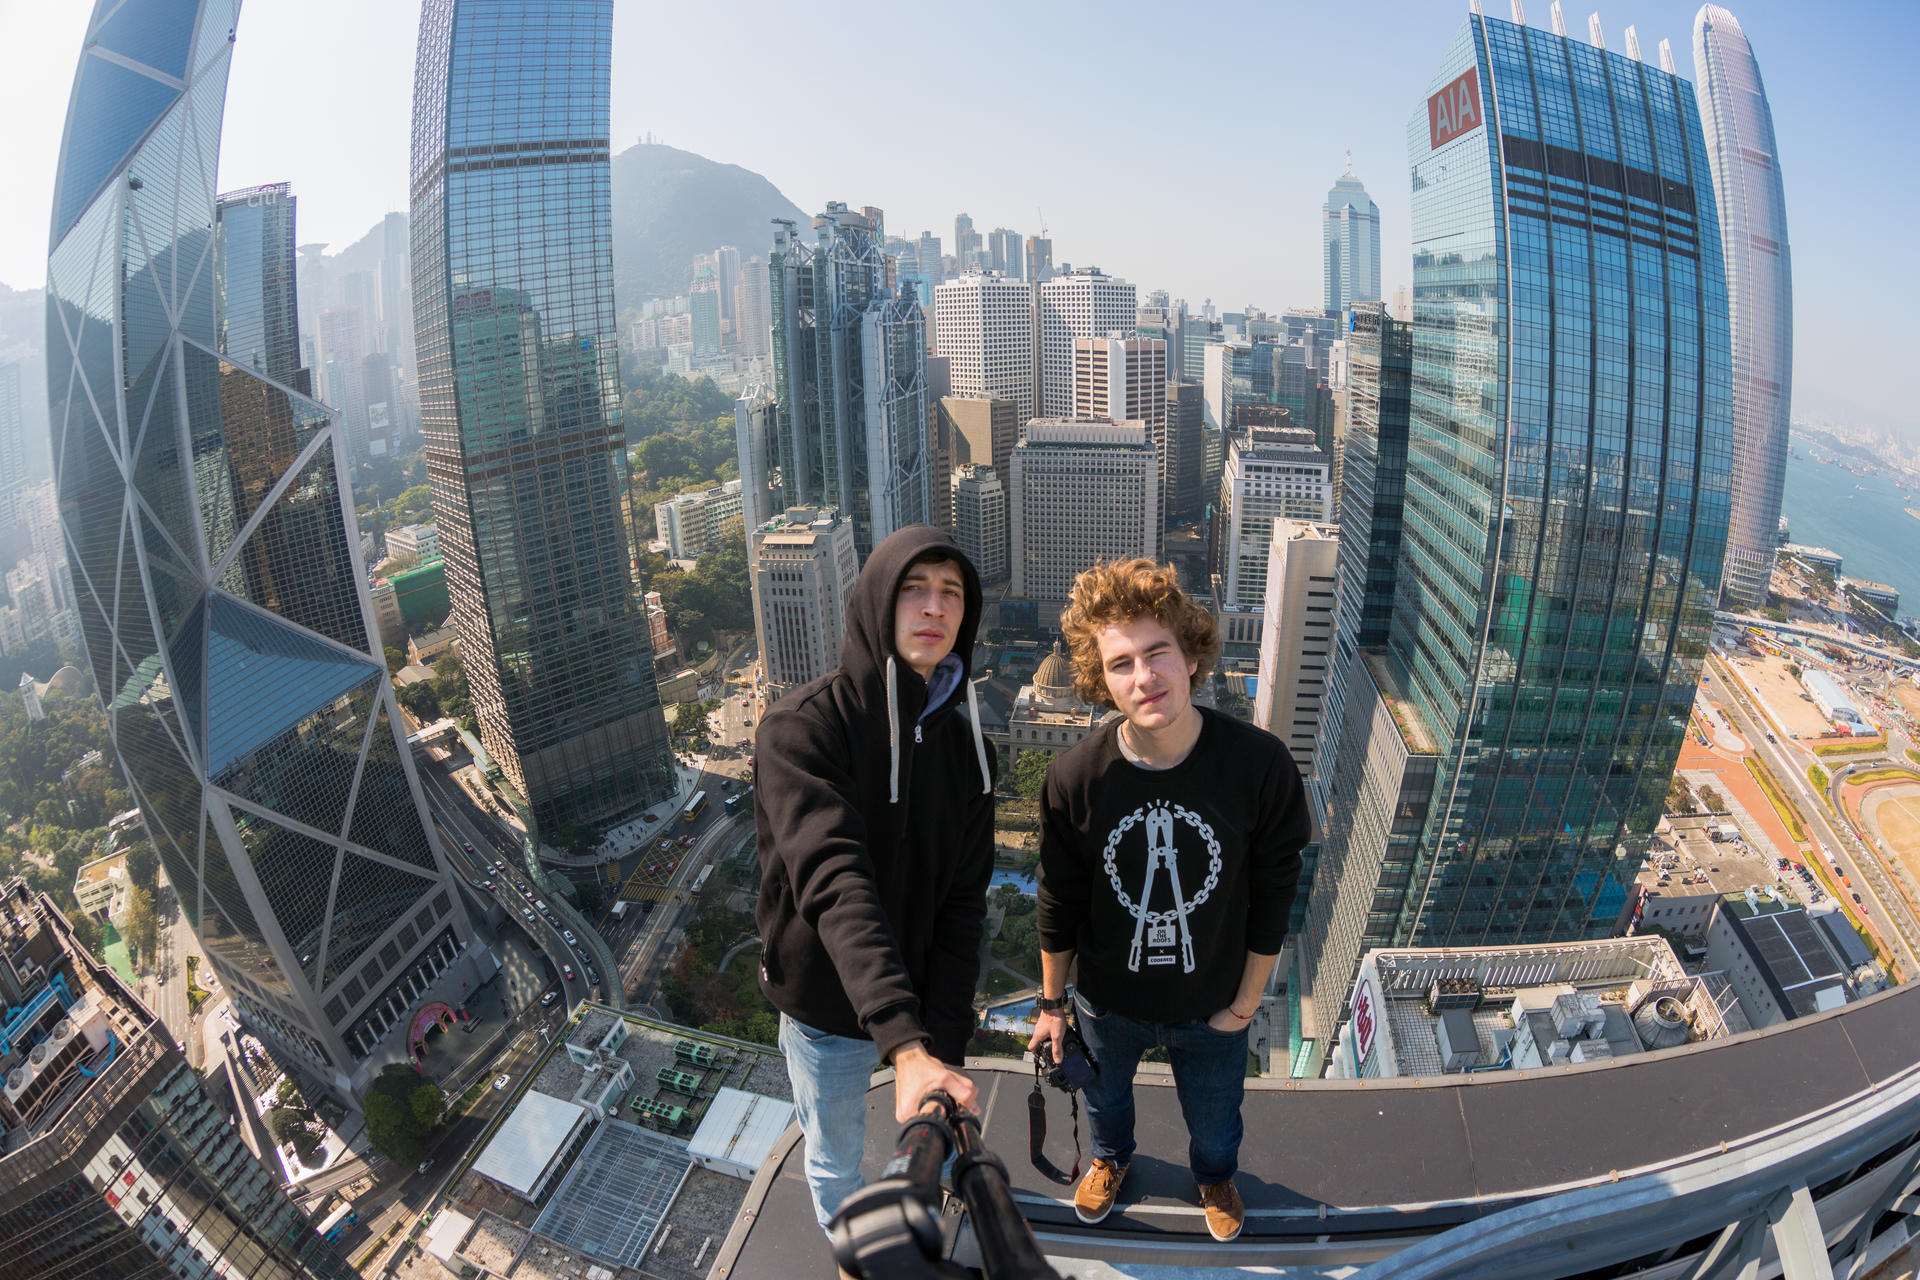 Vadim Makhorov (left) and Vitaliy Raskalov photograph themselves atop the 146-metre high Bank of America Tower earlier this year.